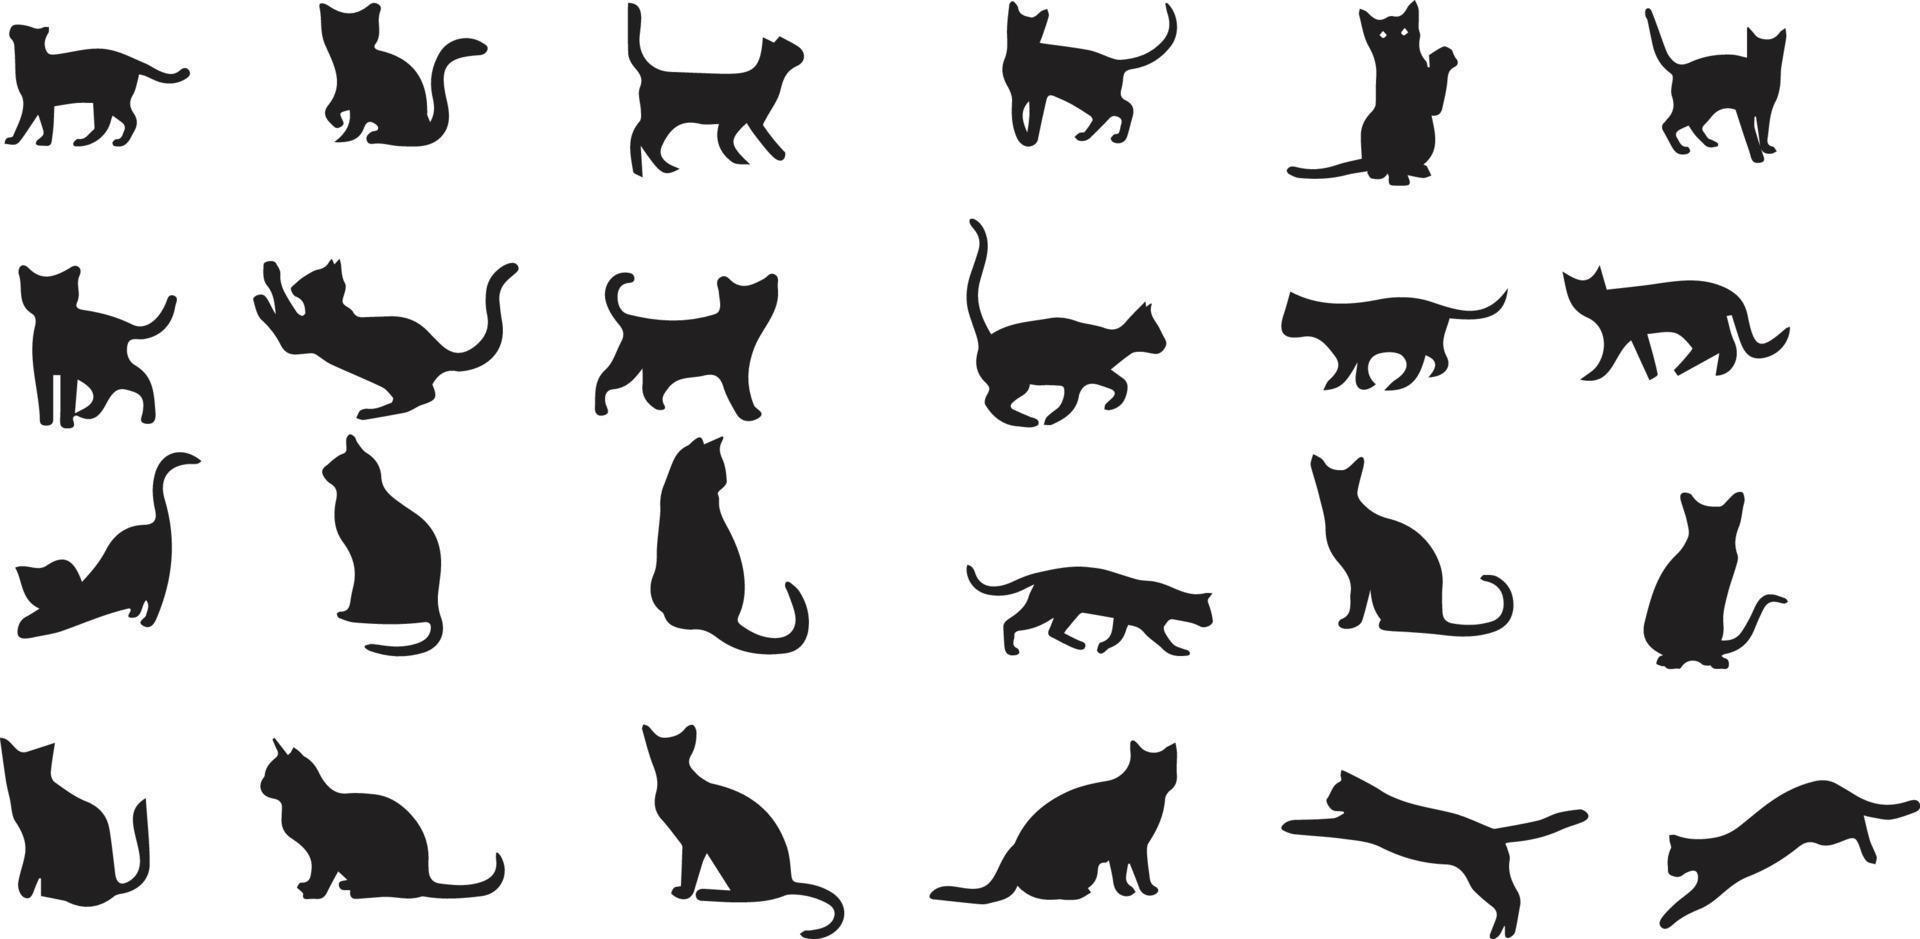 cat silhouette , cute cat in different poses vector illustration